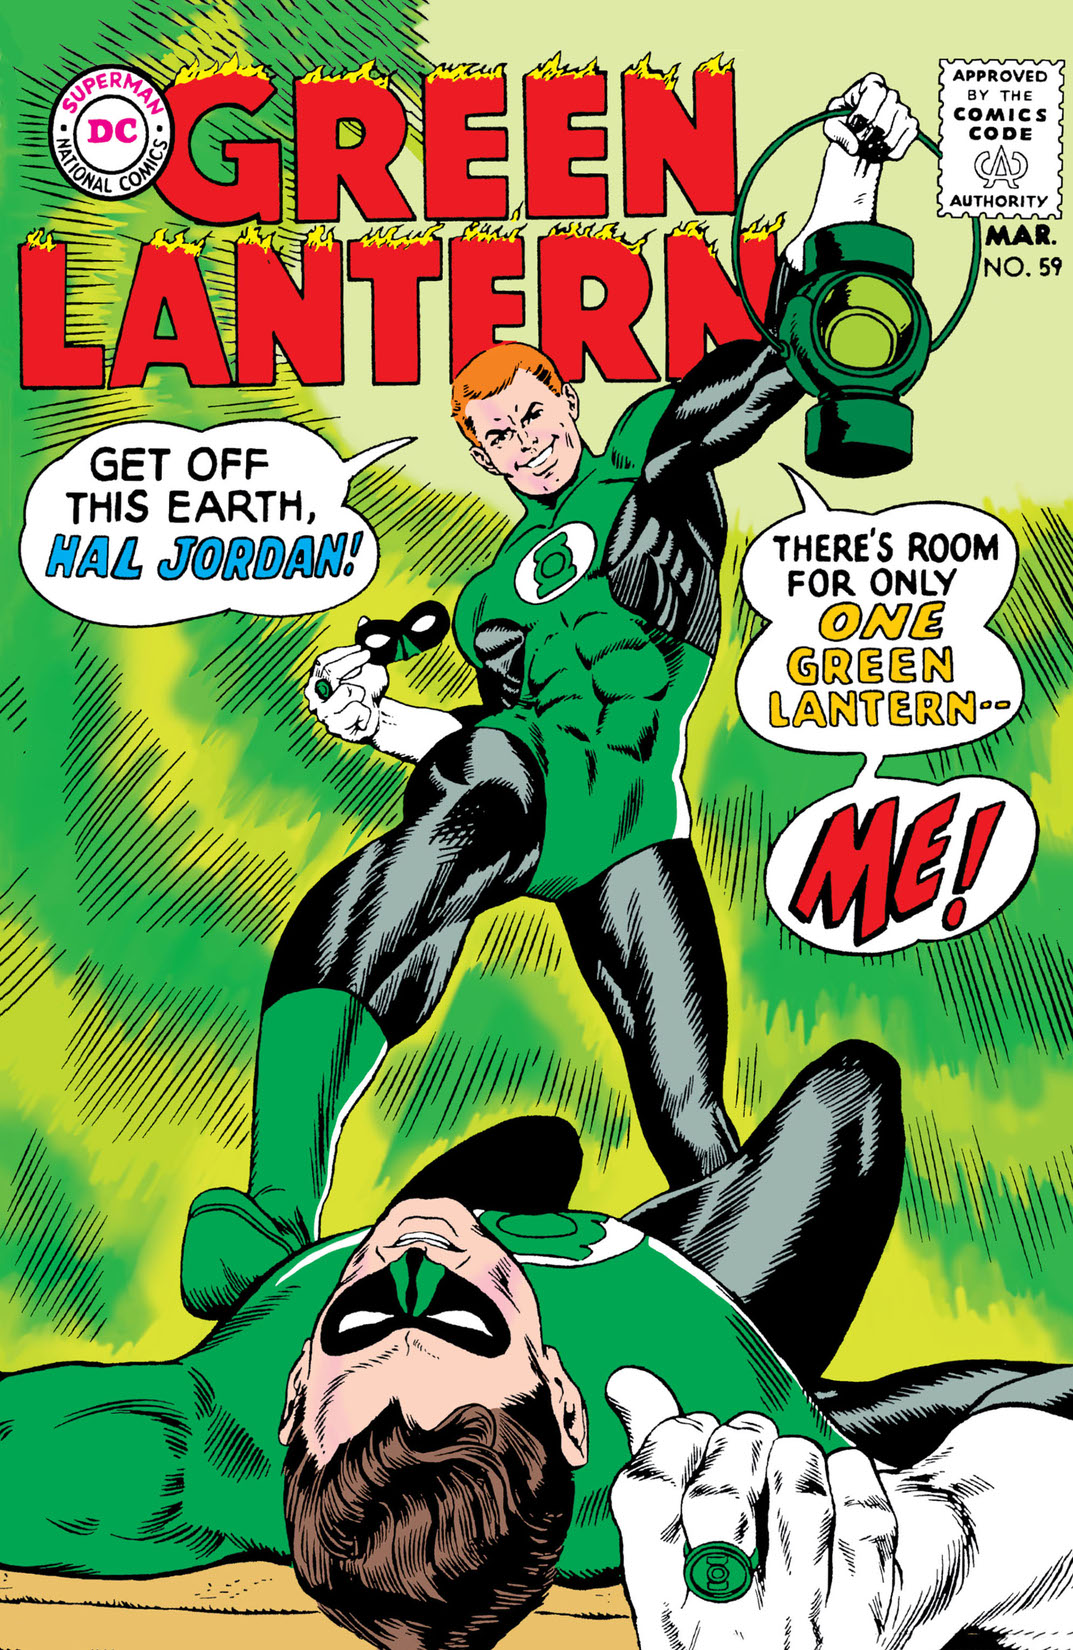 Green Lantern (1960-) #59 preview images